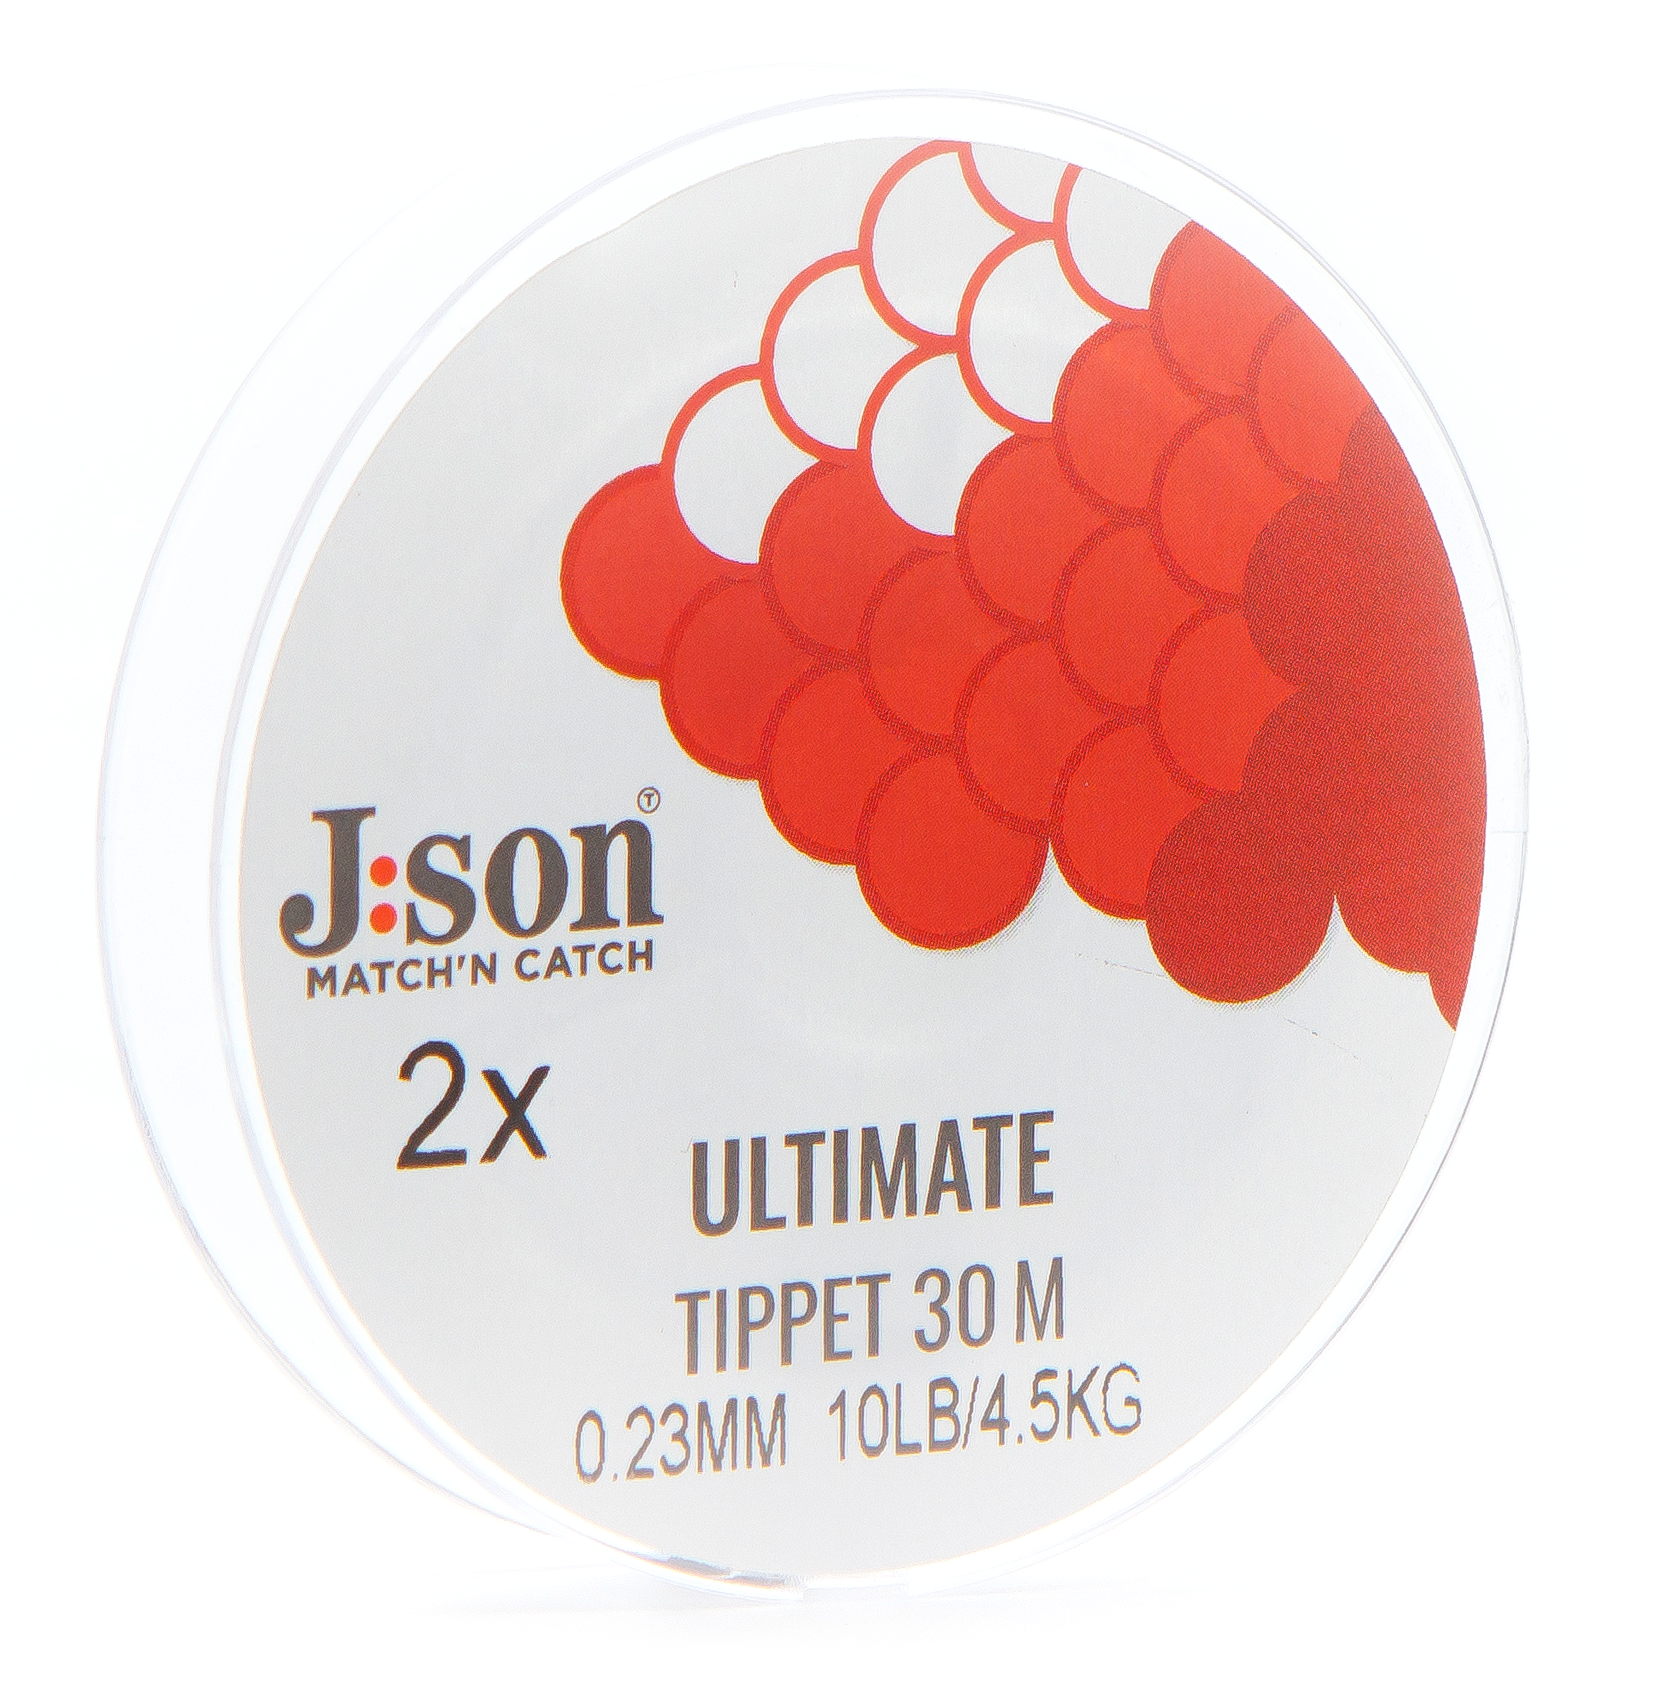 Json Ultimate Tippet 30 m 5X 0.15mm